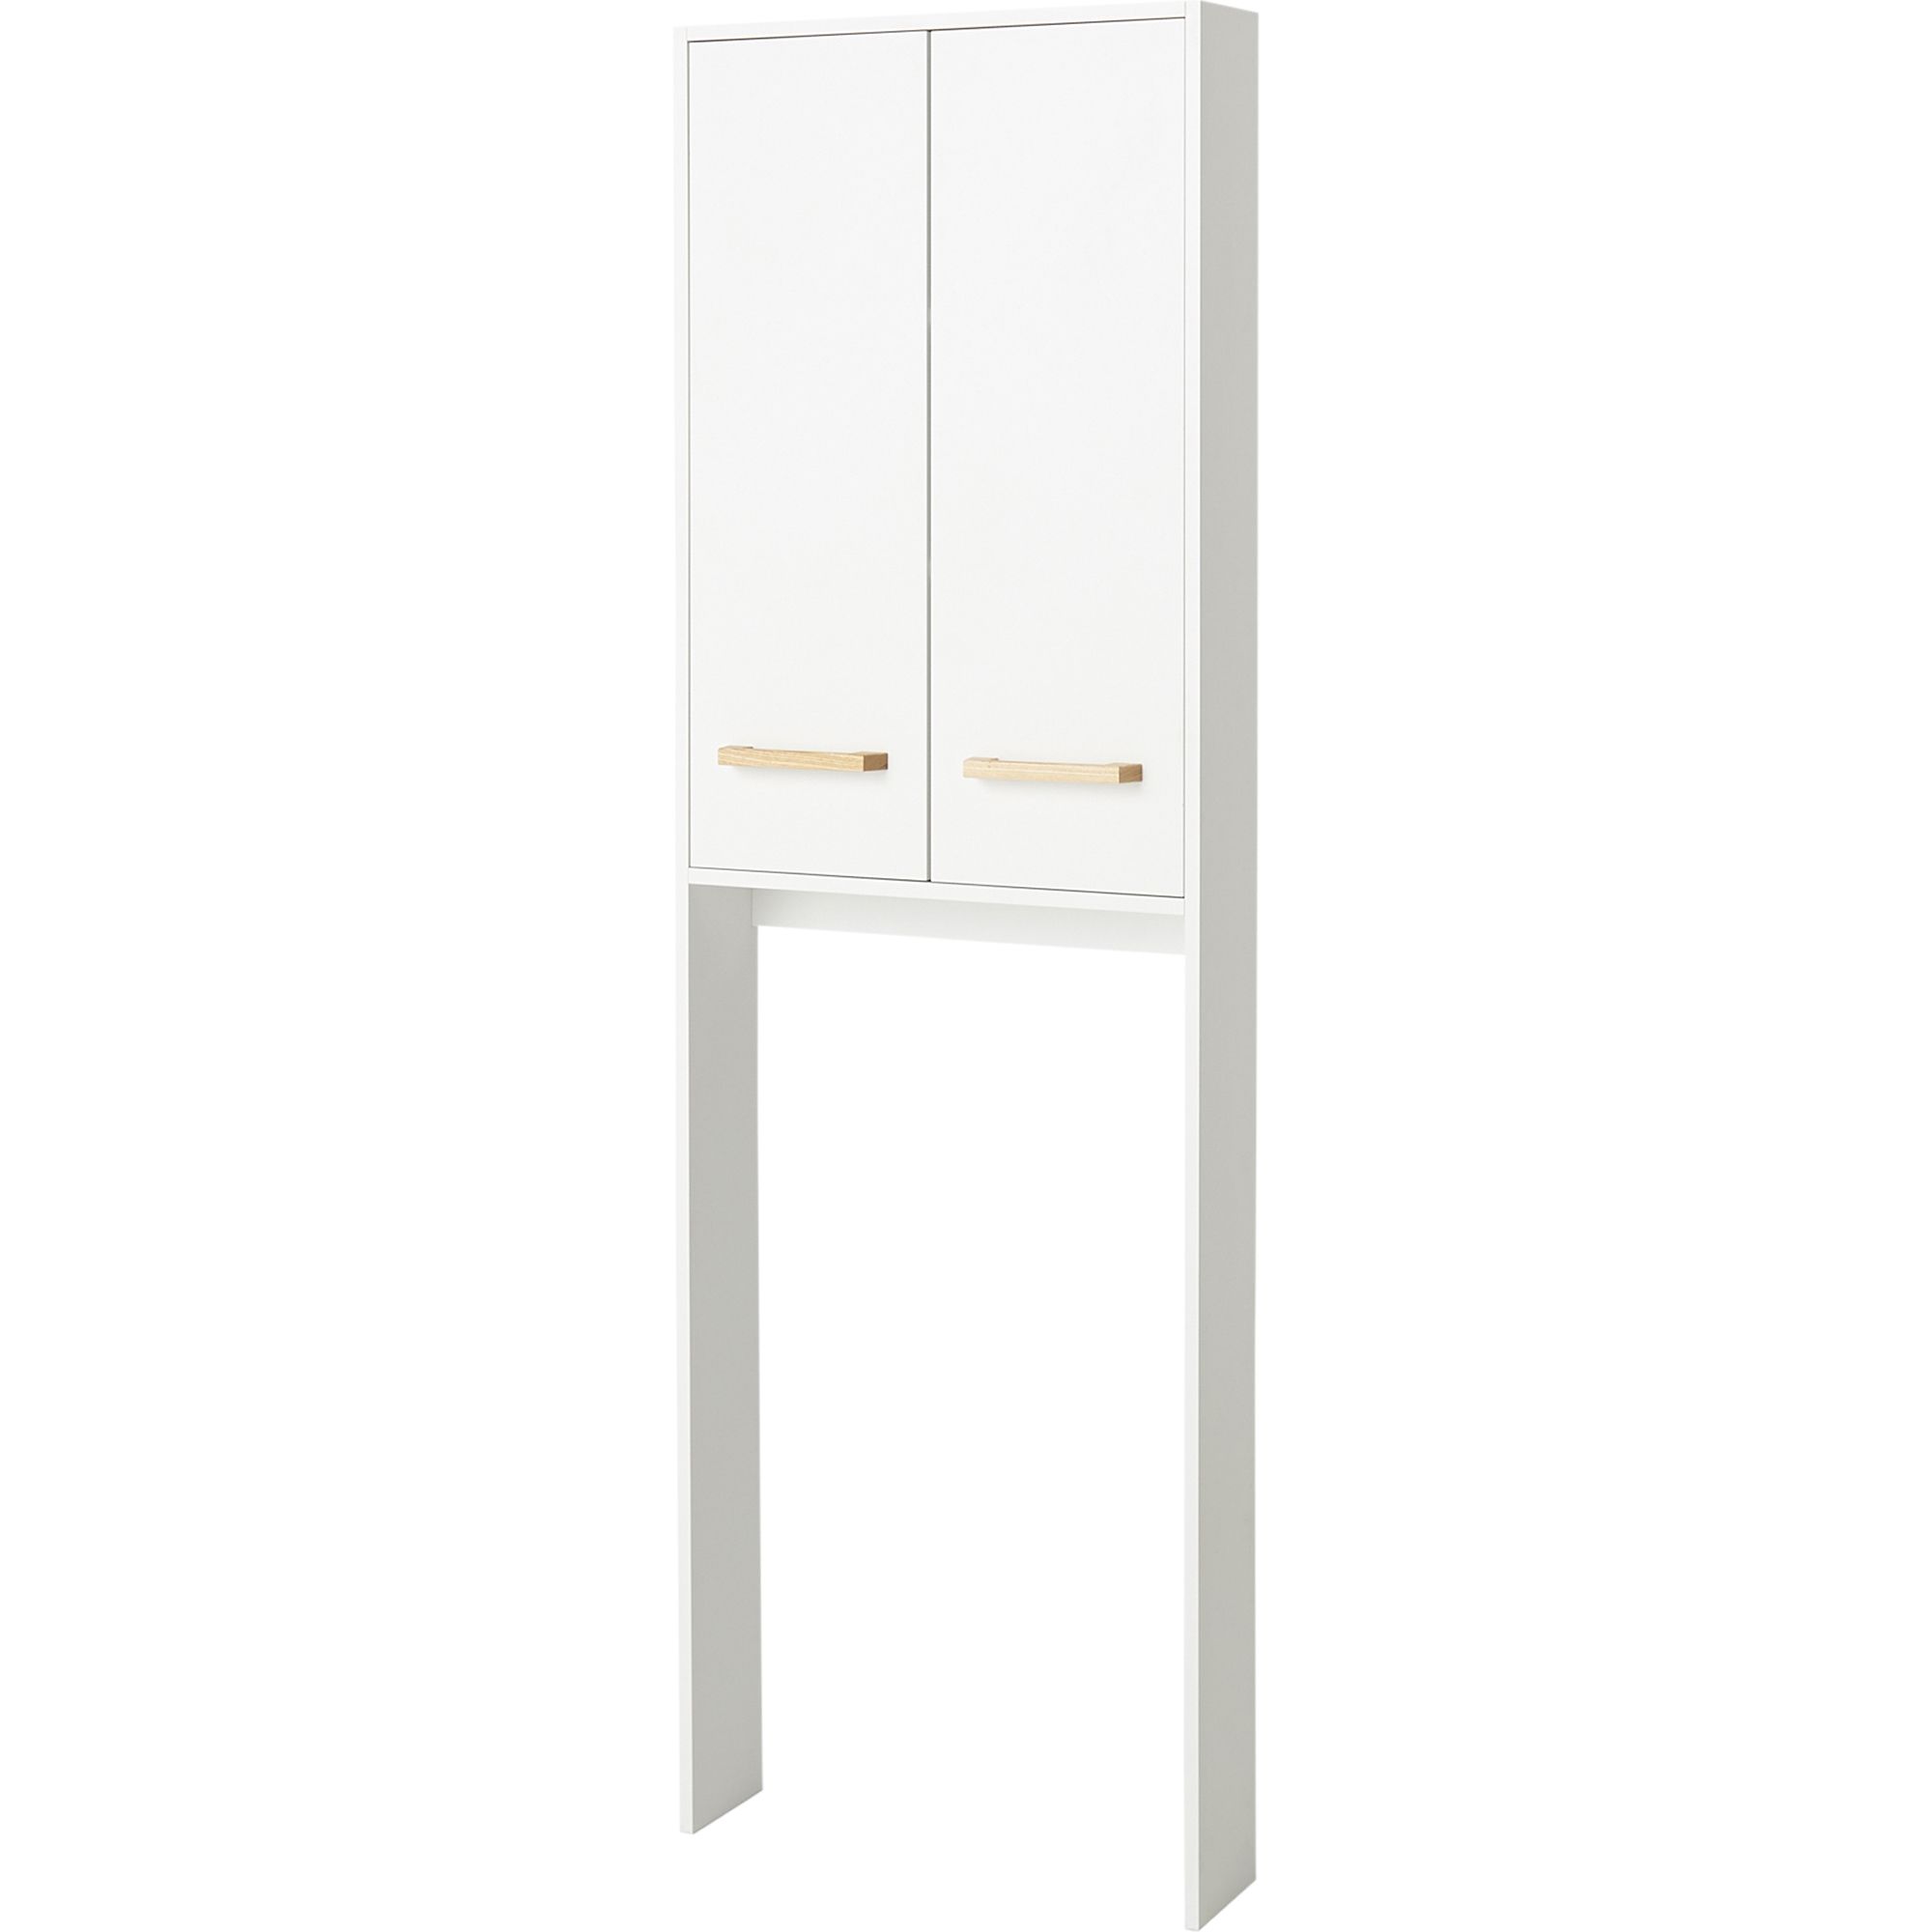 Goodhome Ladoga White Over Toilet Cabinet W 600mm Departments